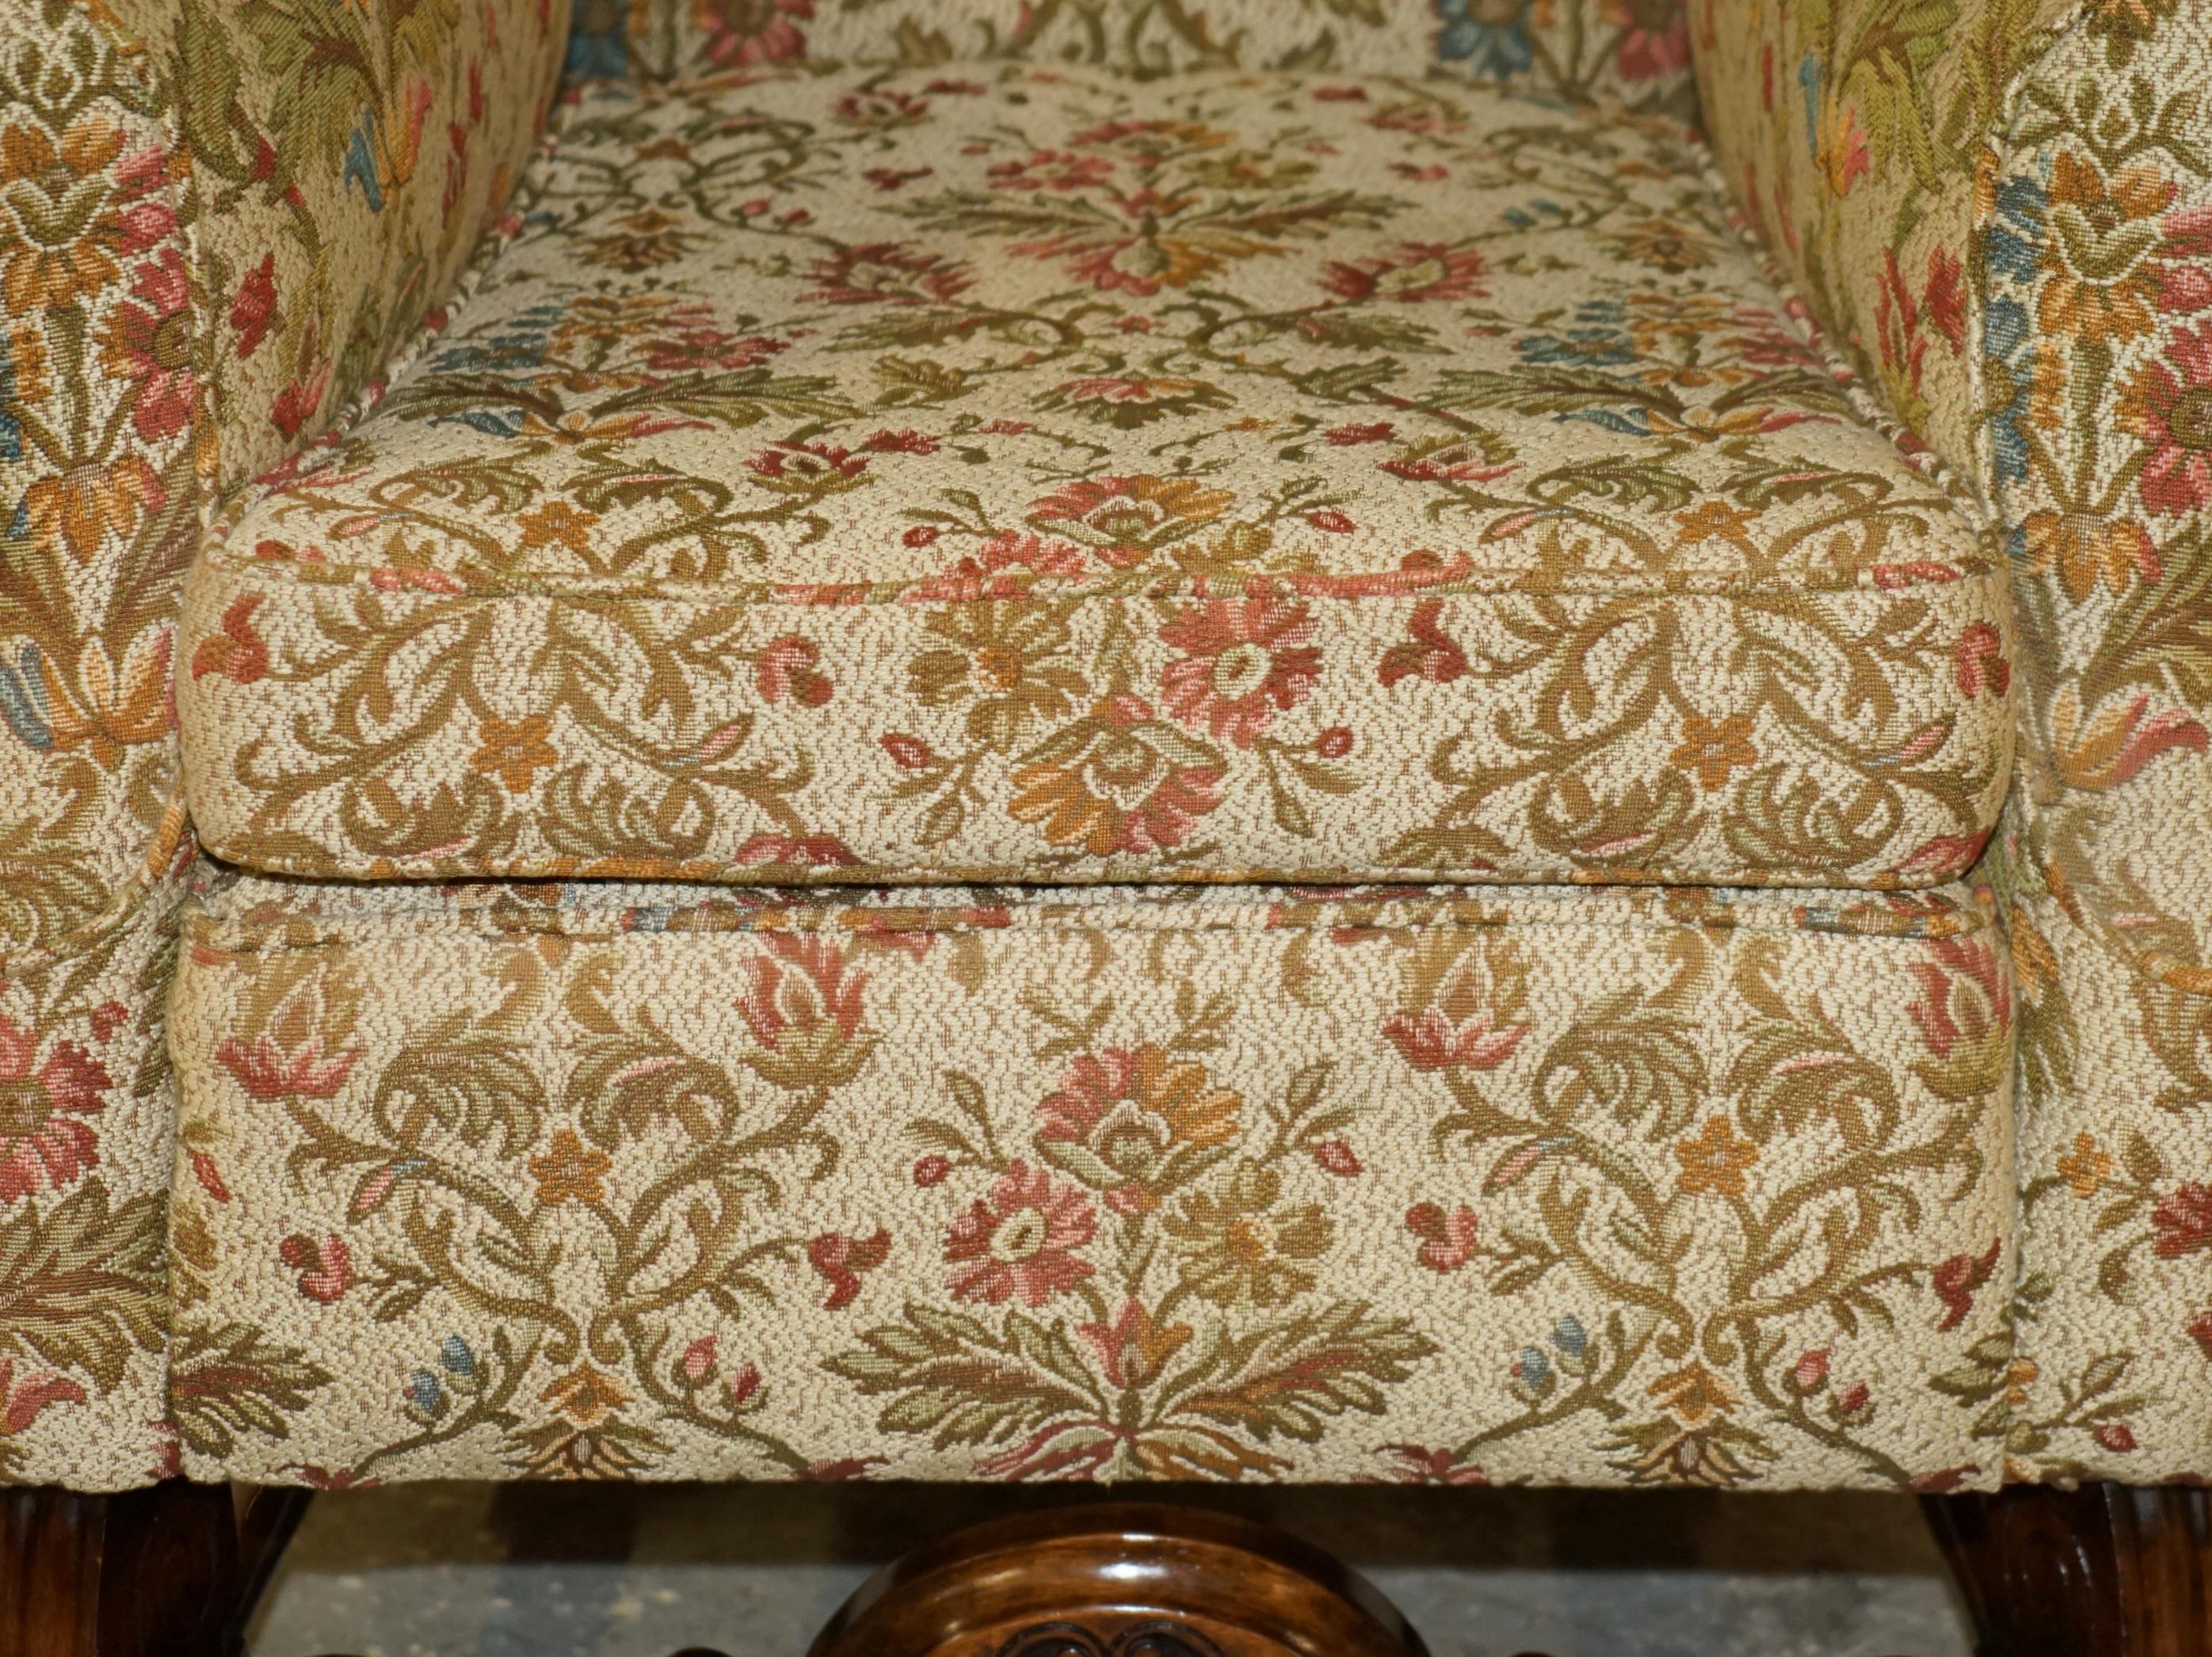 Upholstery PAIR OF ANTIQUE ITALIAN CAROLEAN HIGH BACK WiNGBACK ARMCHAIRS FOR UPHOLSTERY For Sale